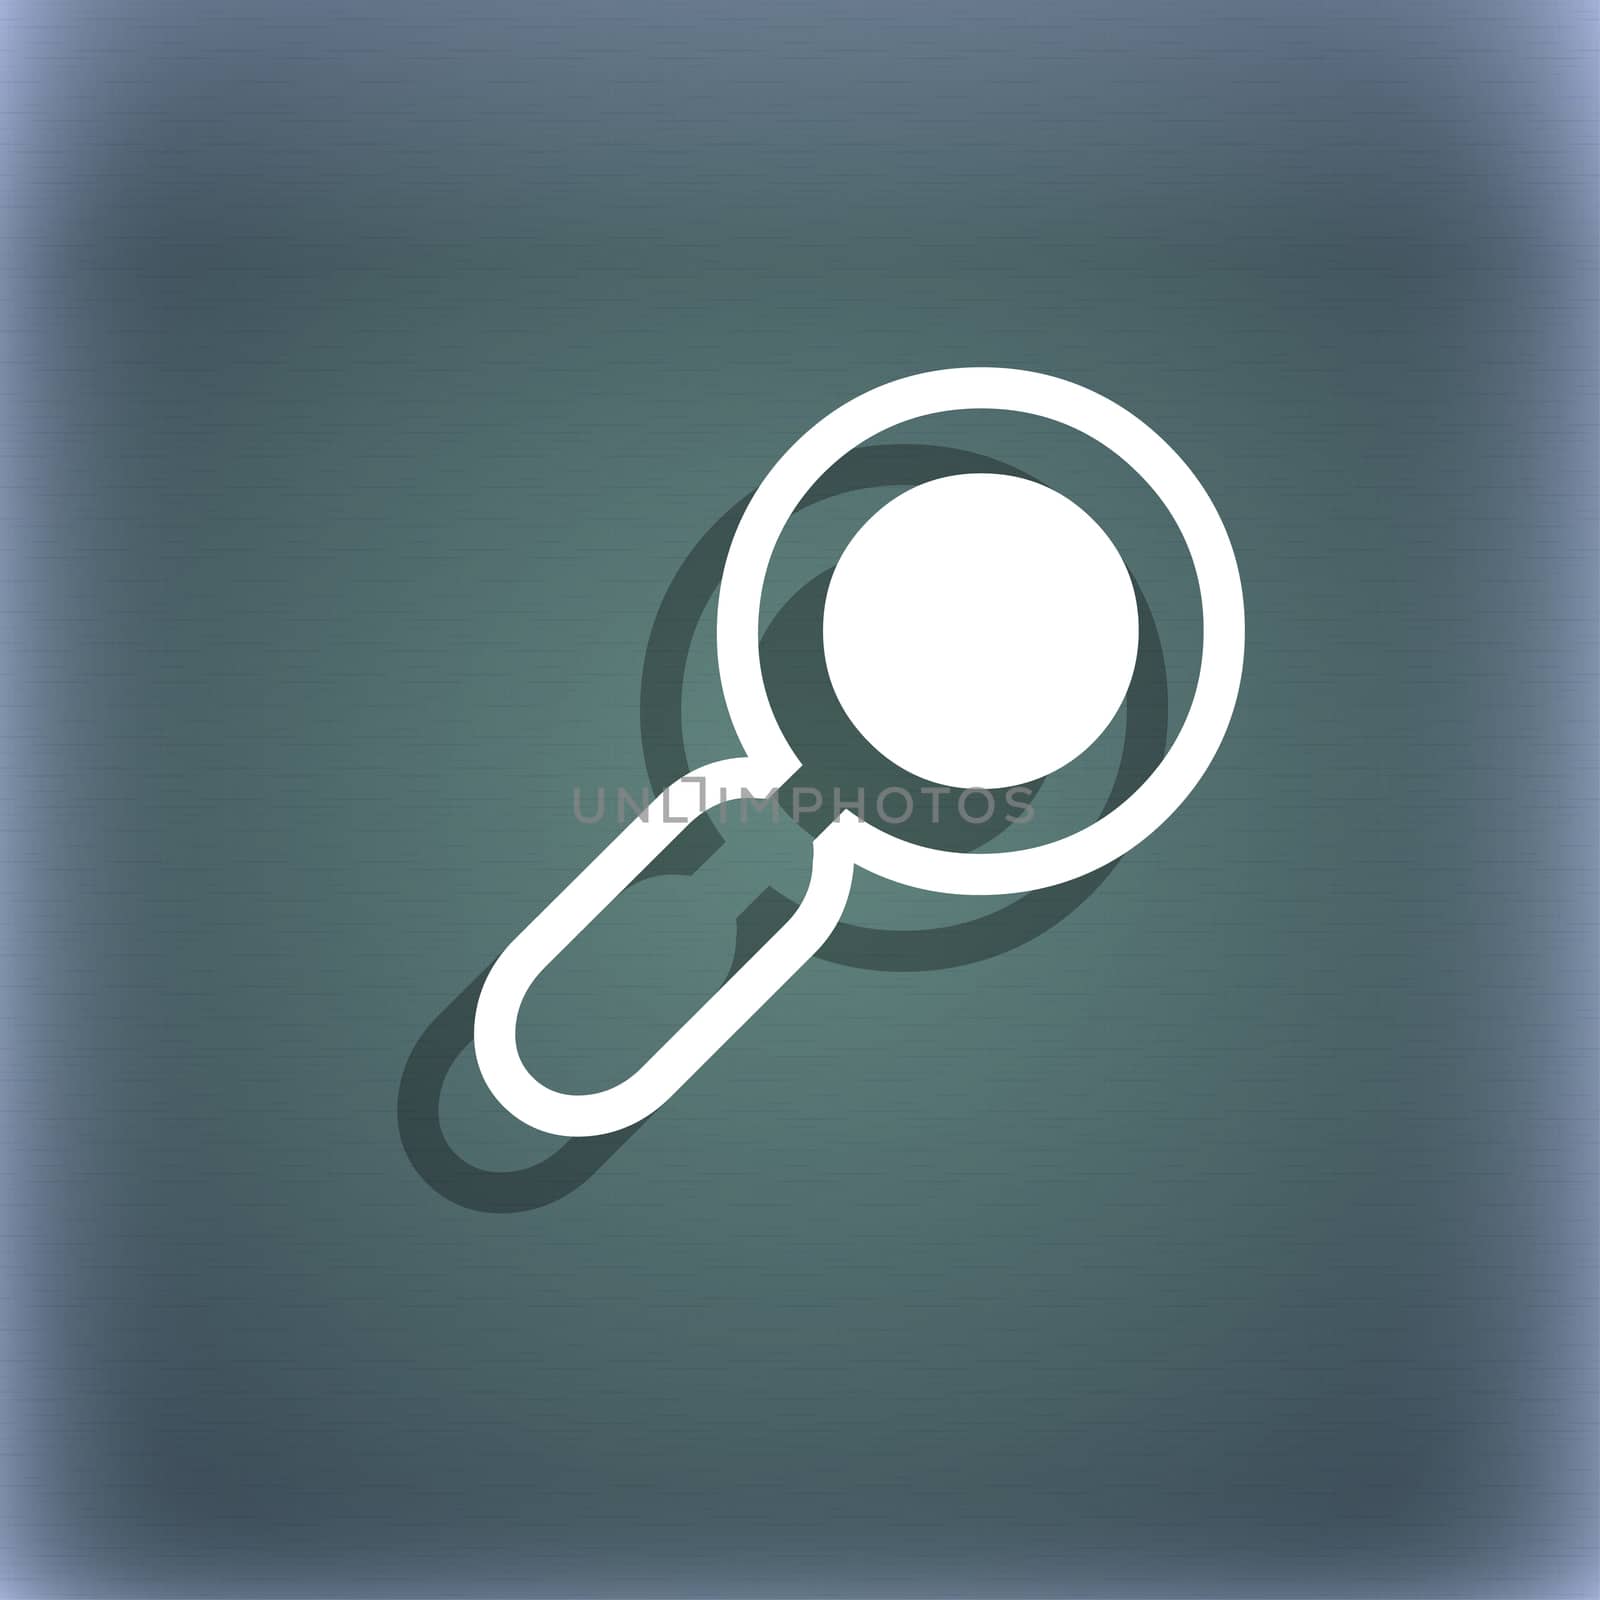 magnifying glass, zoom icon symbol on the blue-green abstract background with shadow and space for your text. illustration